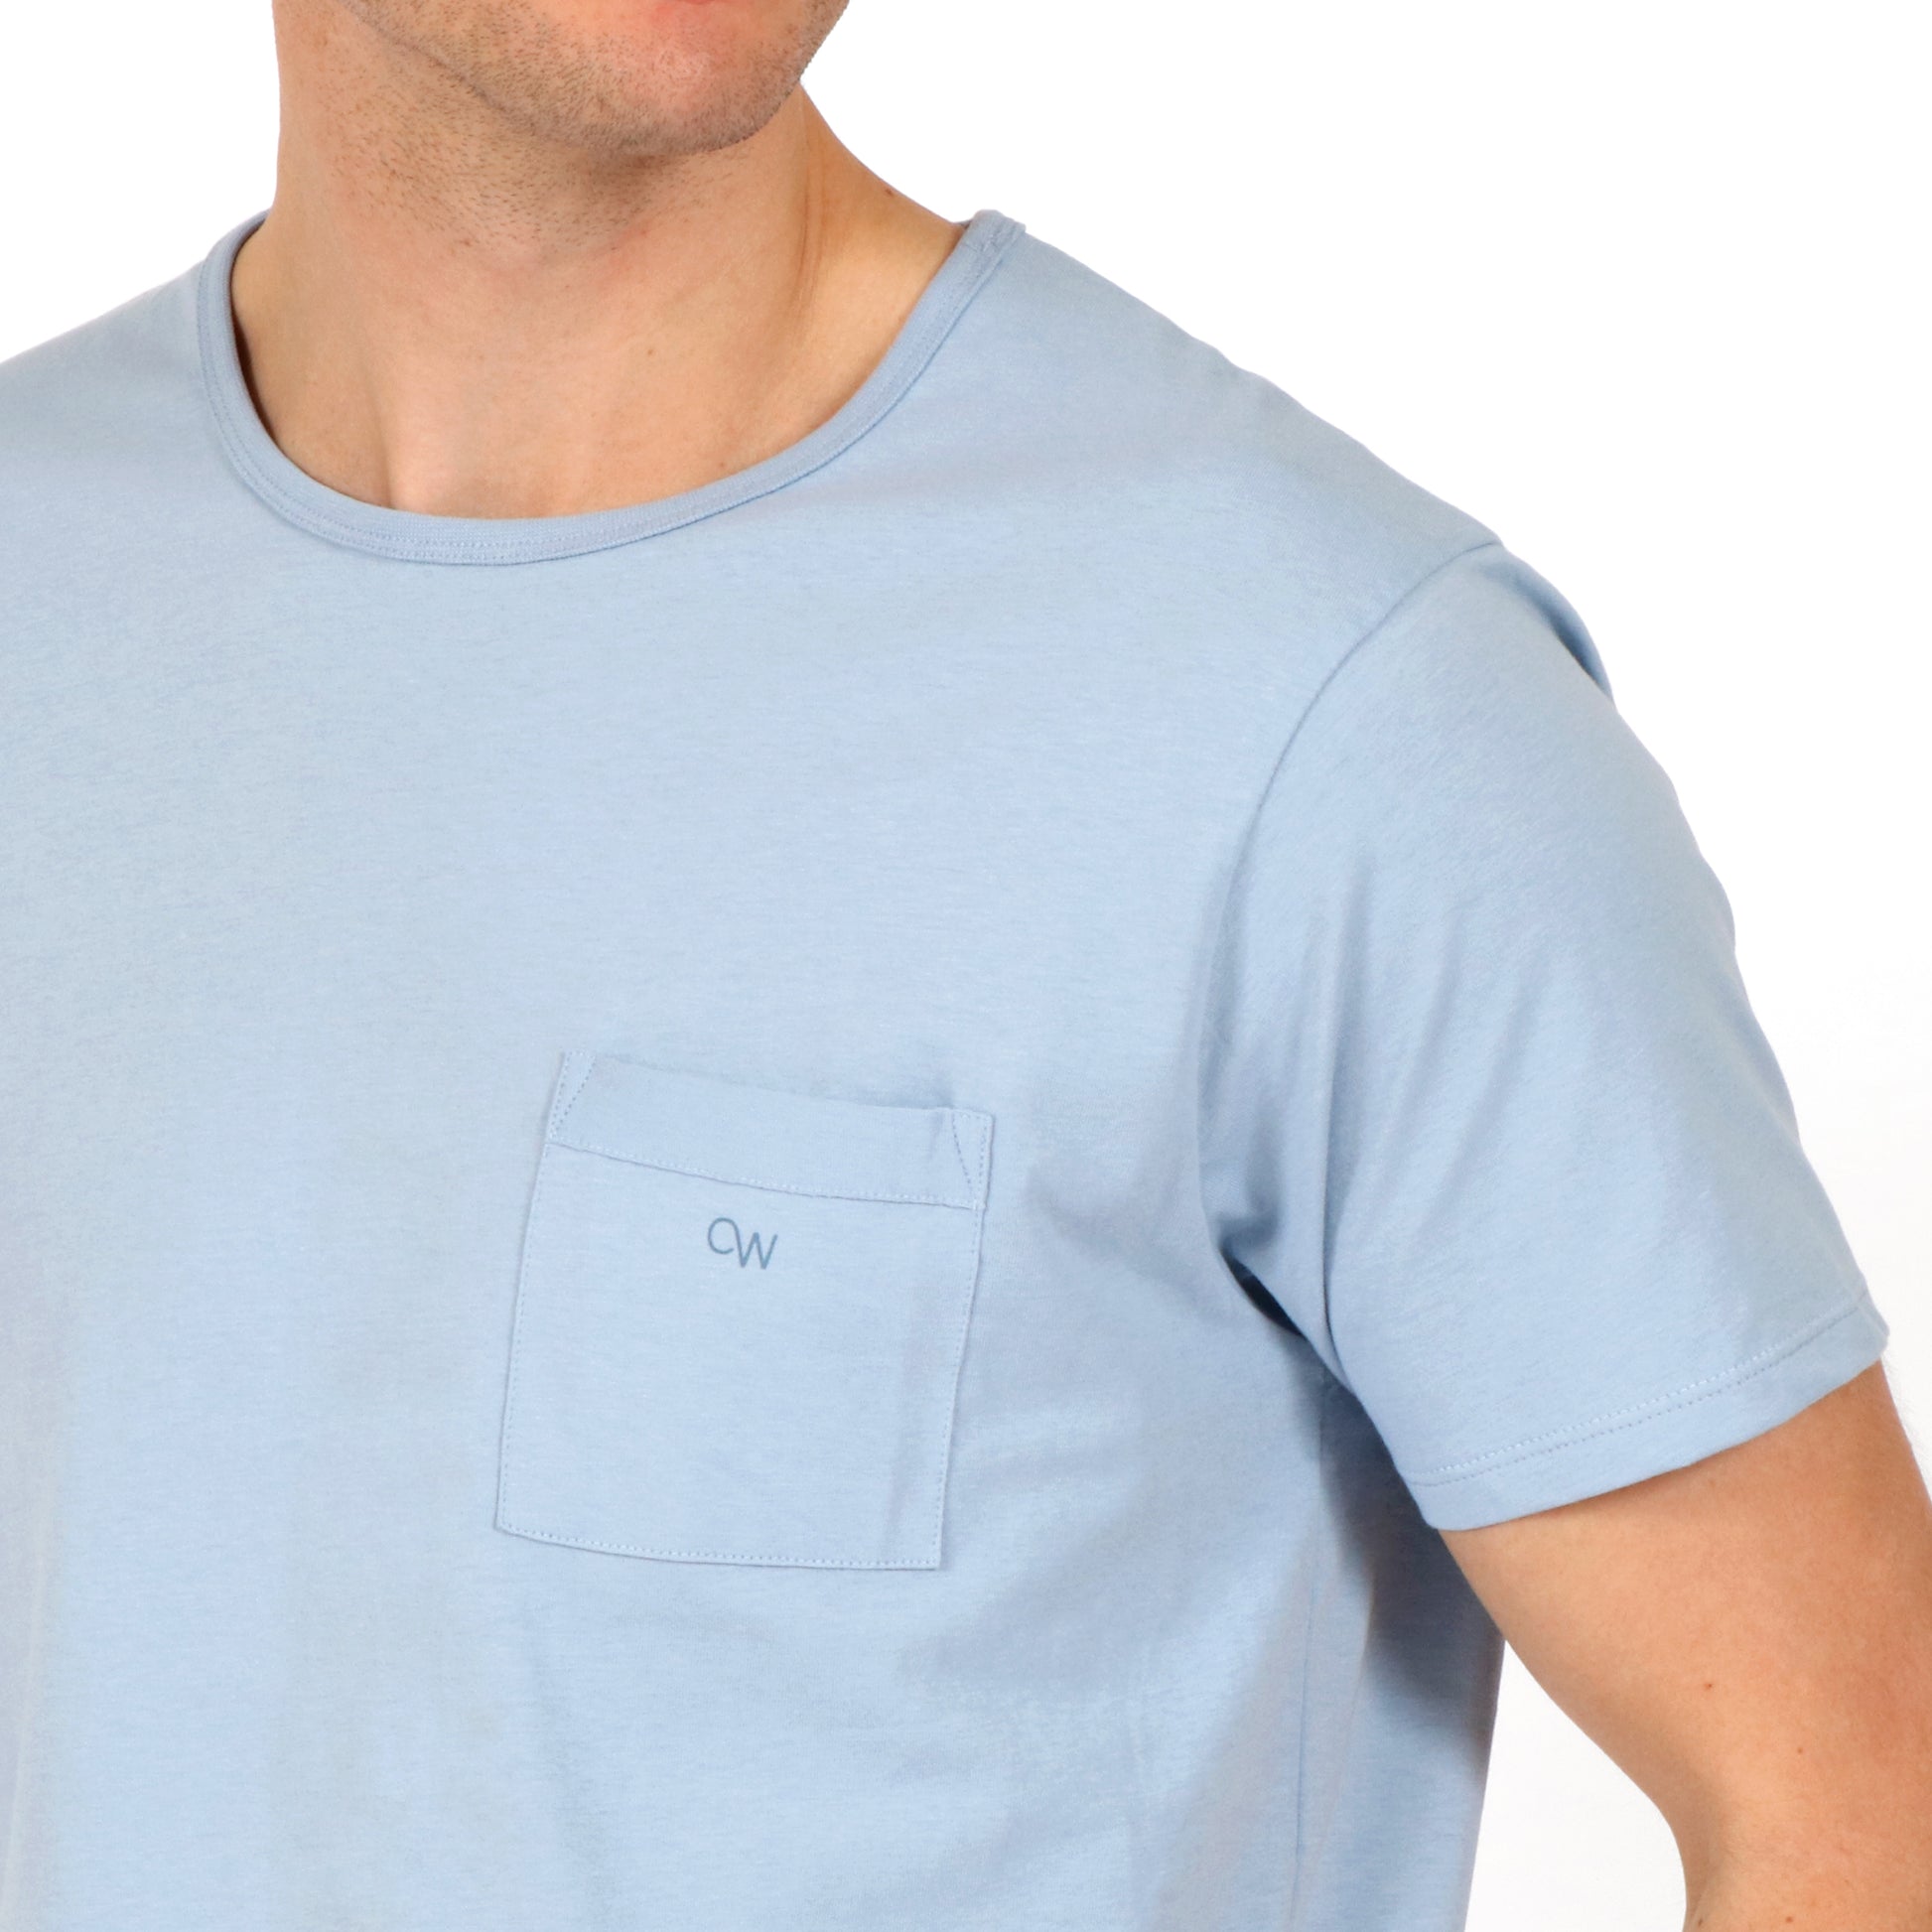 OWTS2101 Steel Fade Blue Essential Beach T-Shirt on body front pocket detail